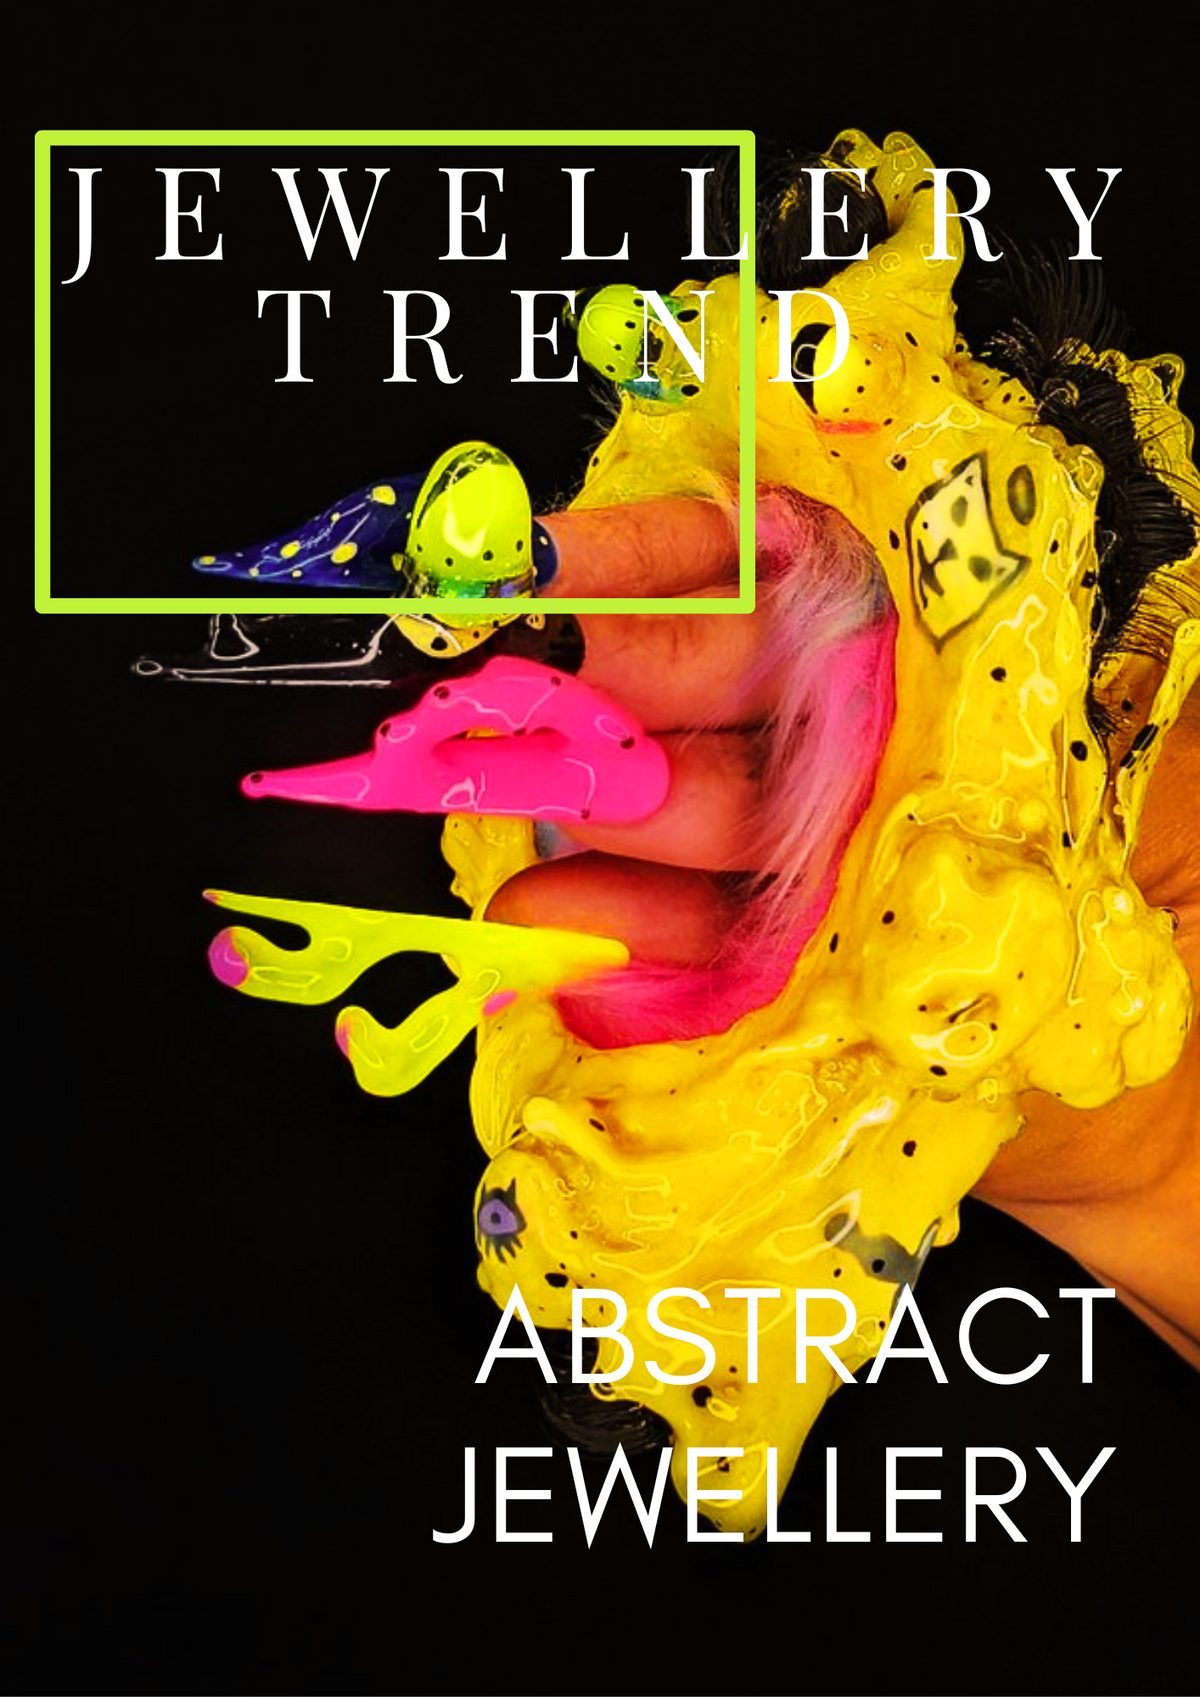 Jewellery Trend Abstract Jewellery Pushing The Conventions of Jewellery Design